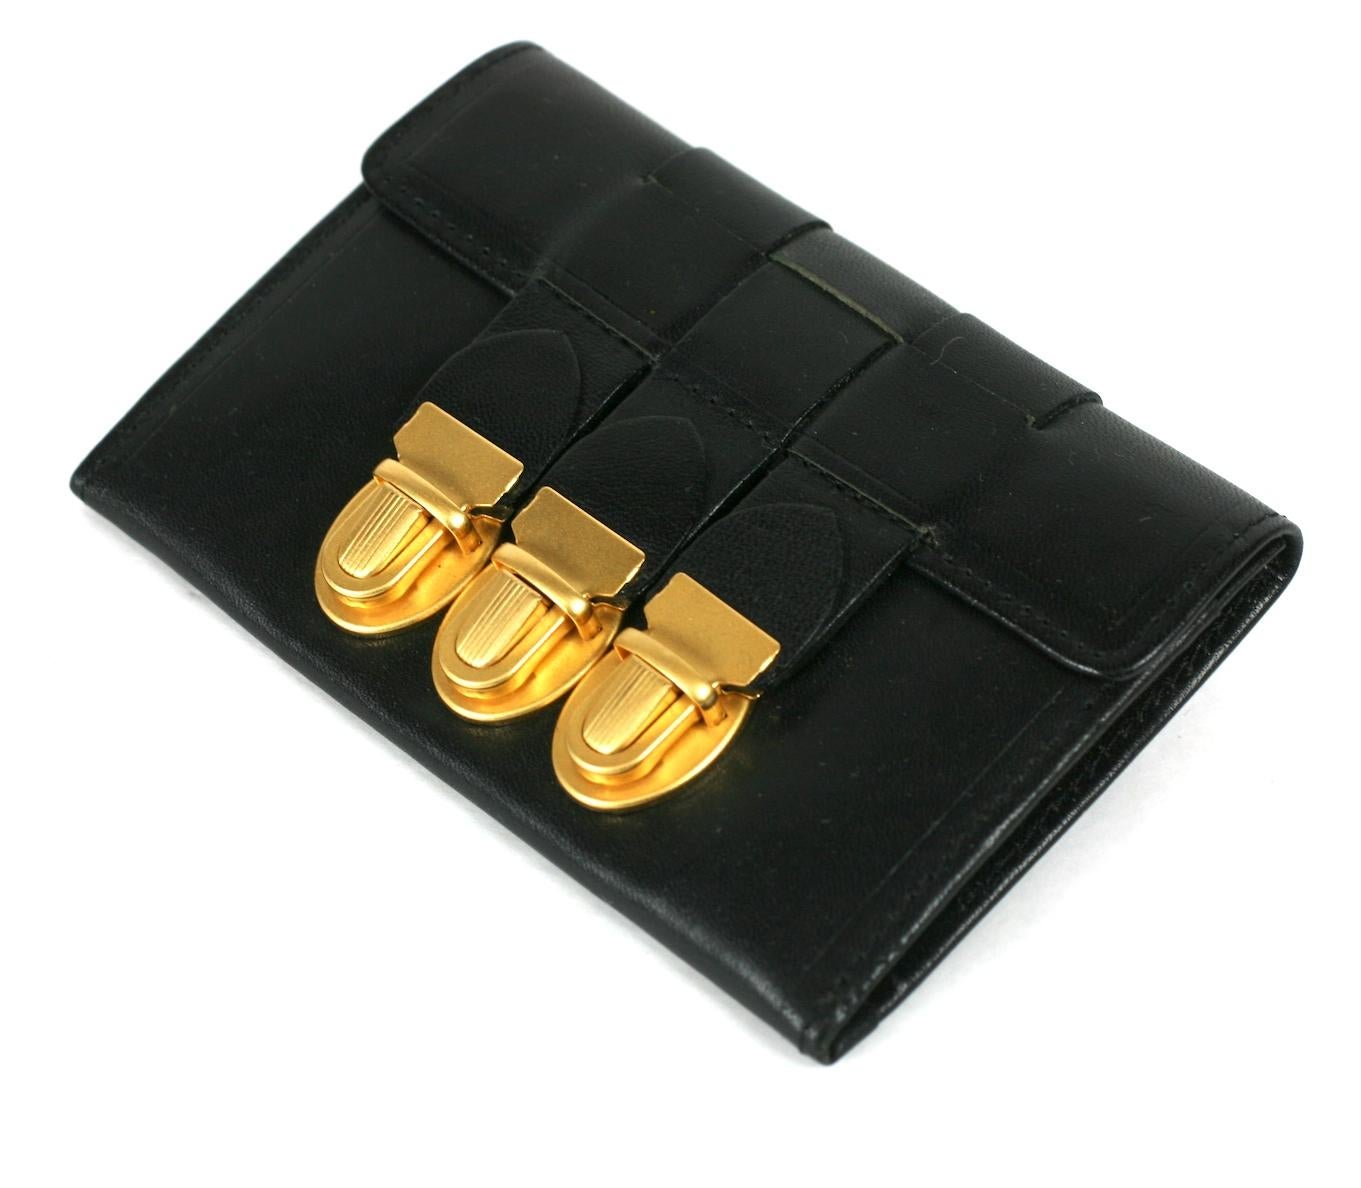 Jean Paul Gaultier Woven Wallet Card Holder in sturdy black leather with triple matte gold locks from the 1980's. Includes original box and pouch.  1980's France. 
4.5